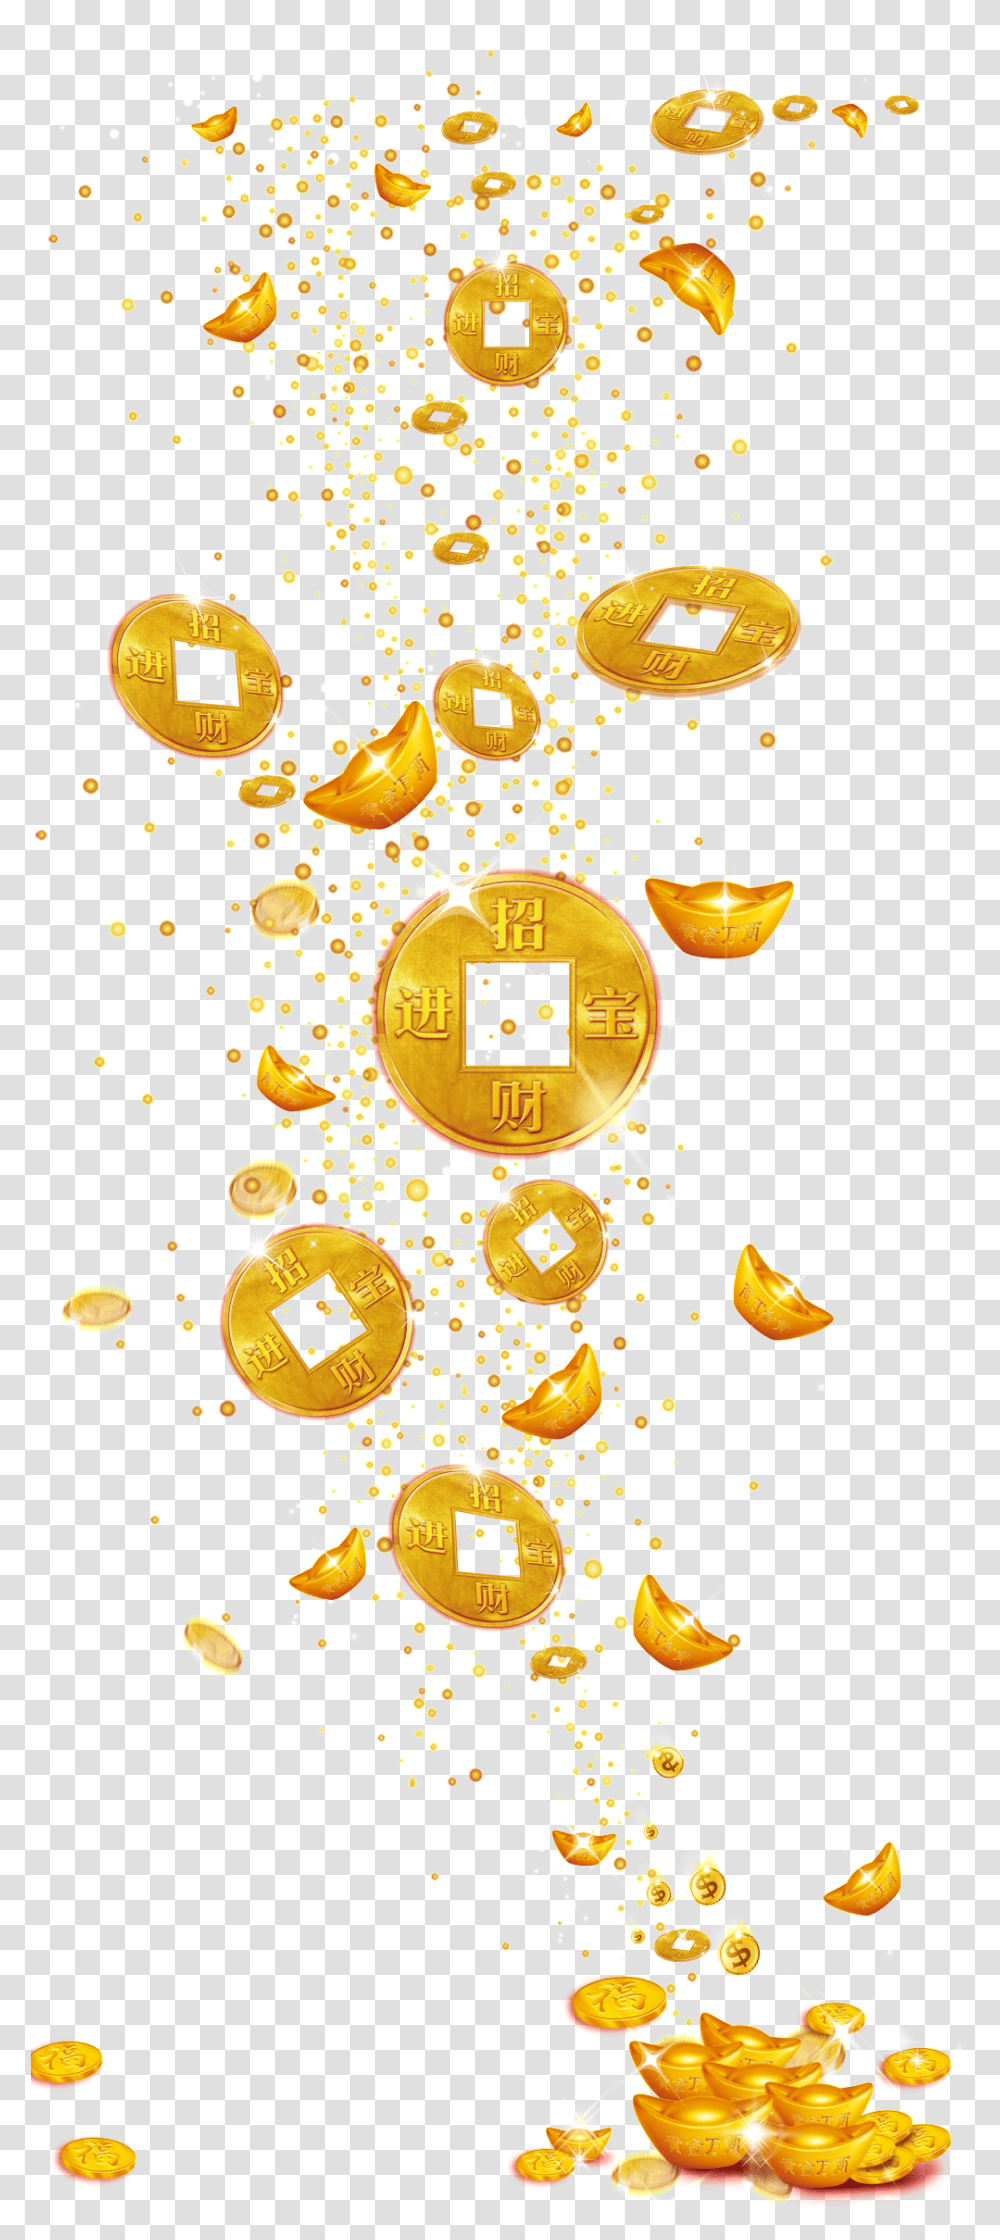 Floating Gold Ingot Coins Decoration Gold Coin Chinese Falling, Christmas Tree, Ornament Transparent Png